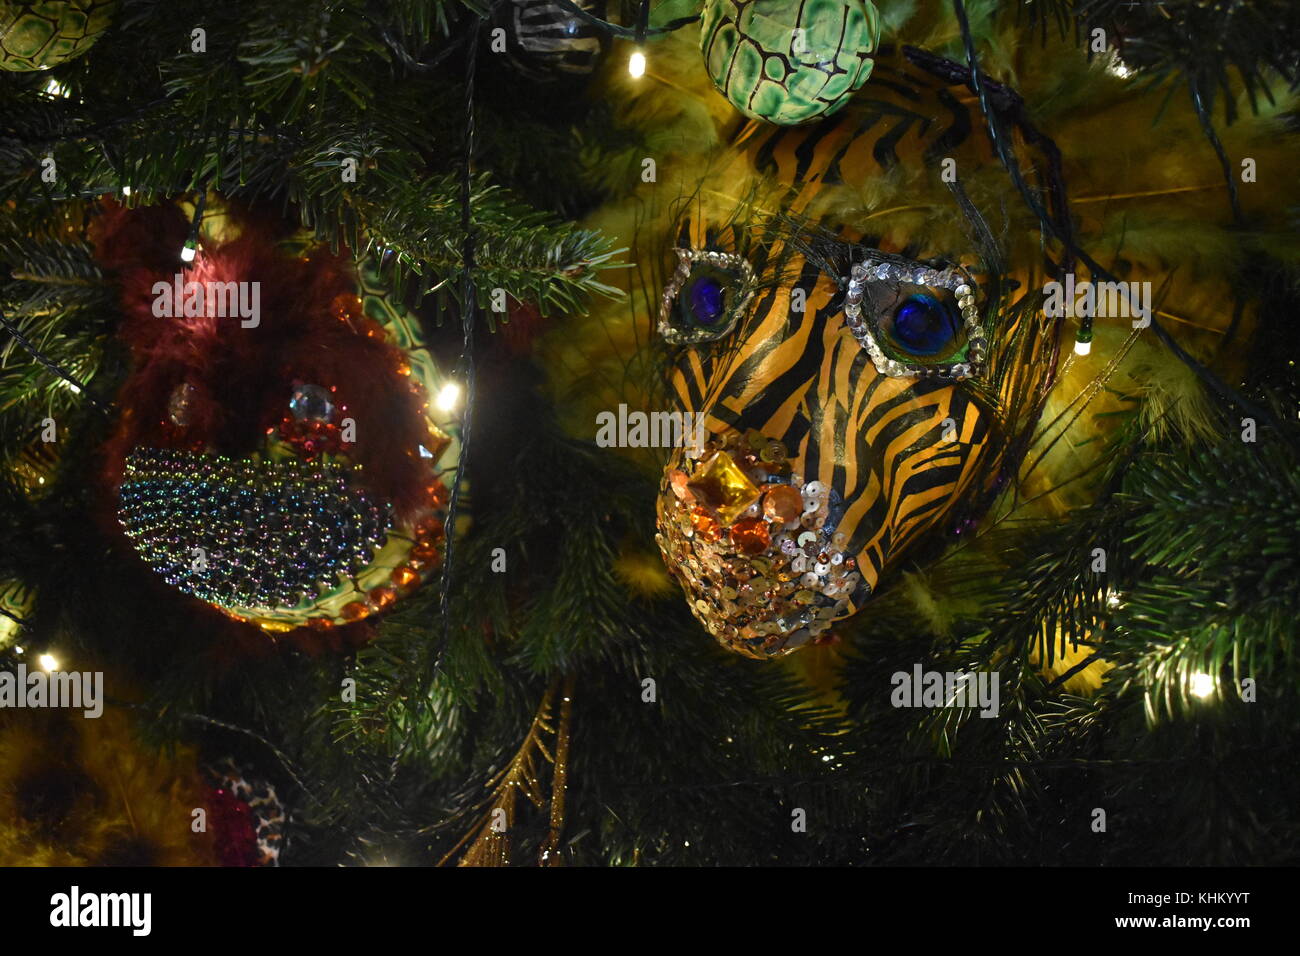 Waddesdon Manor: Christmas 2017, Enchanted Menagerie. Fantasy animals inspired by Waddesdon's collections, adorn trees at the Manor for Christmas 2017 Stock Photo